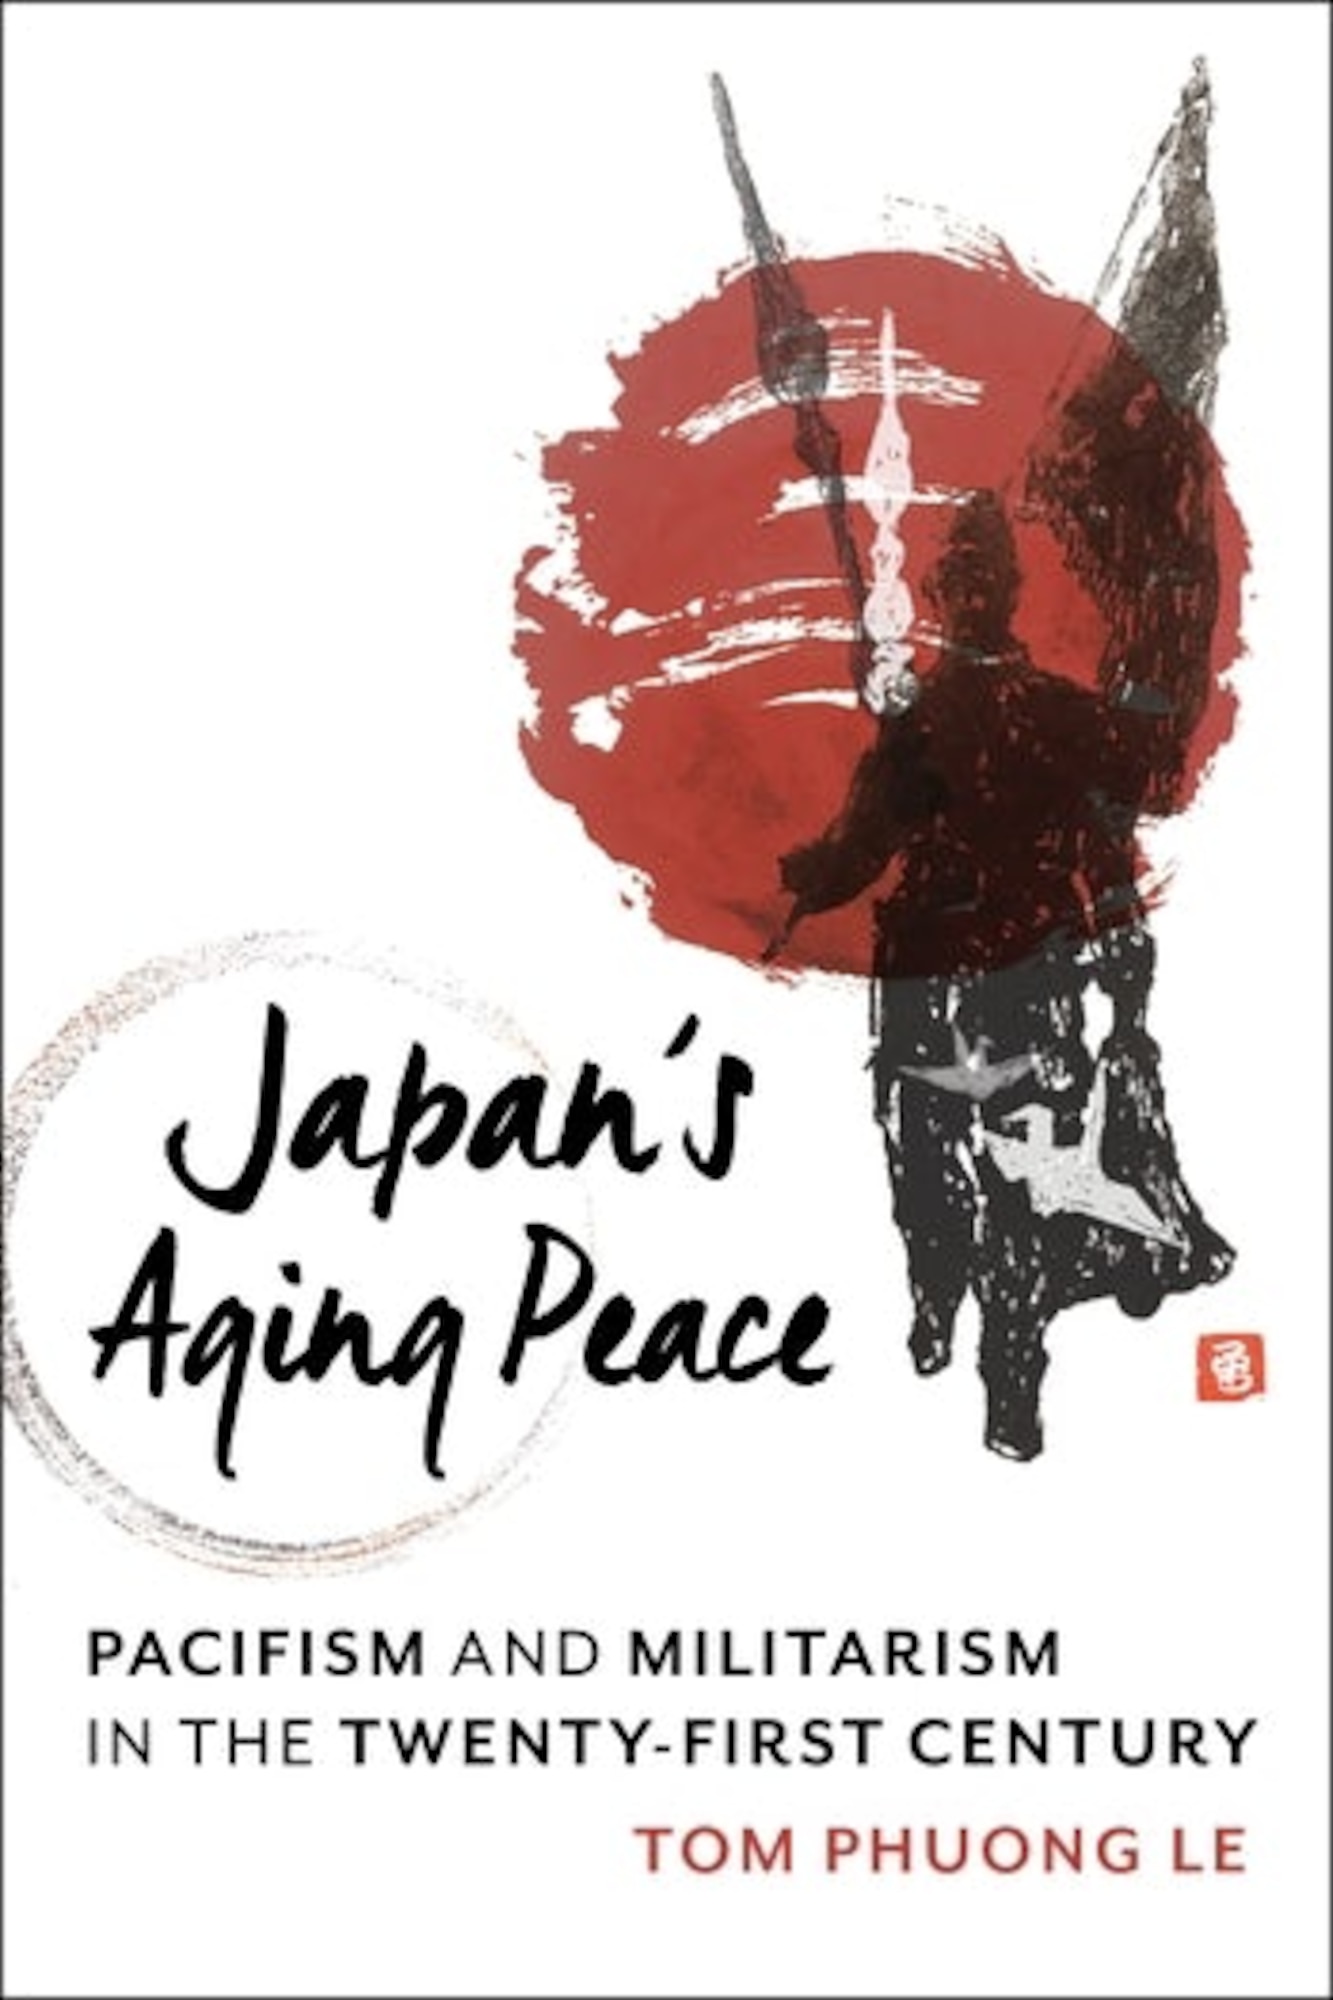 Book cover: Le - Japan's Aging Peace